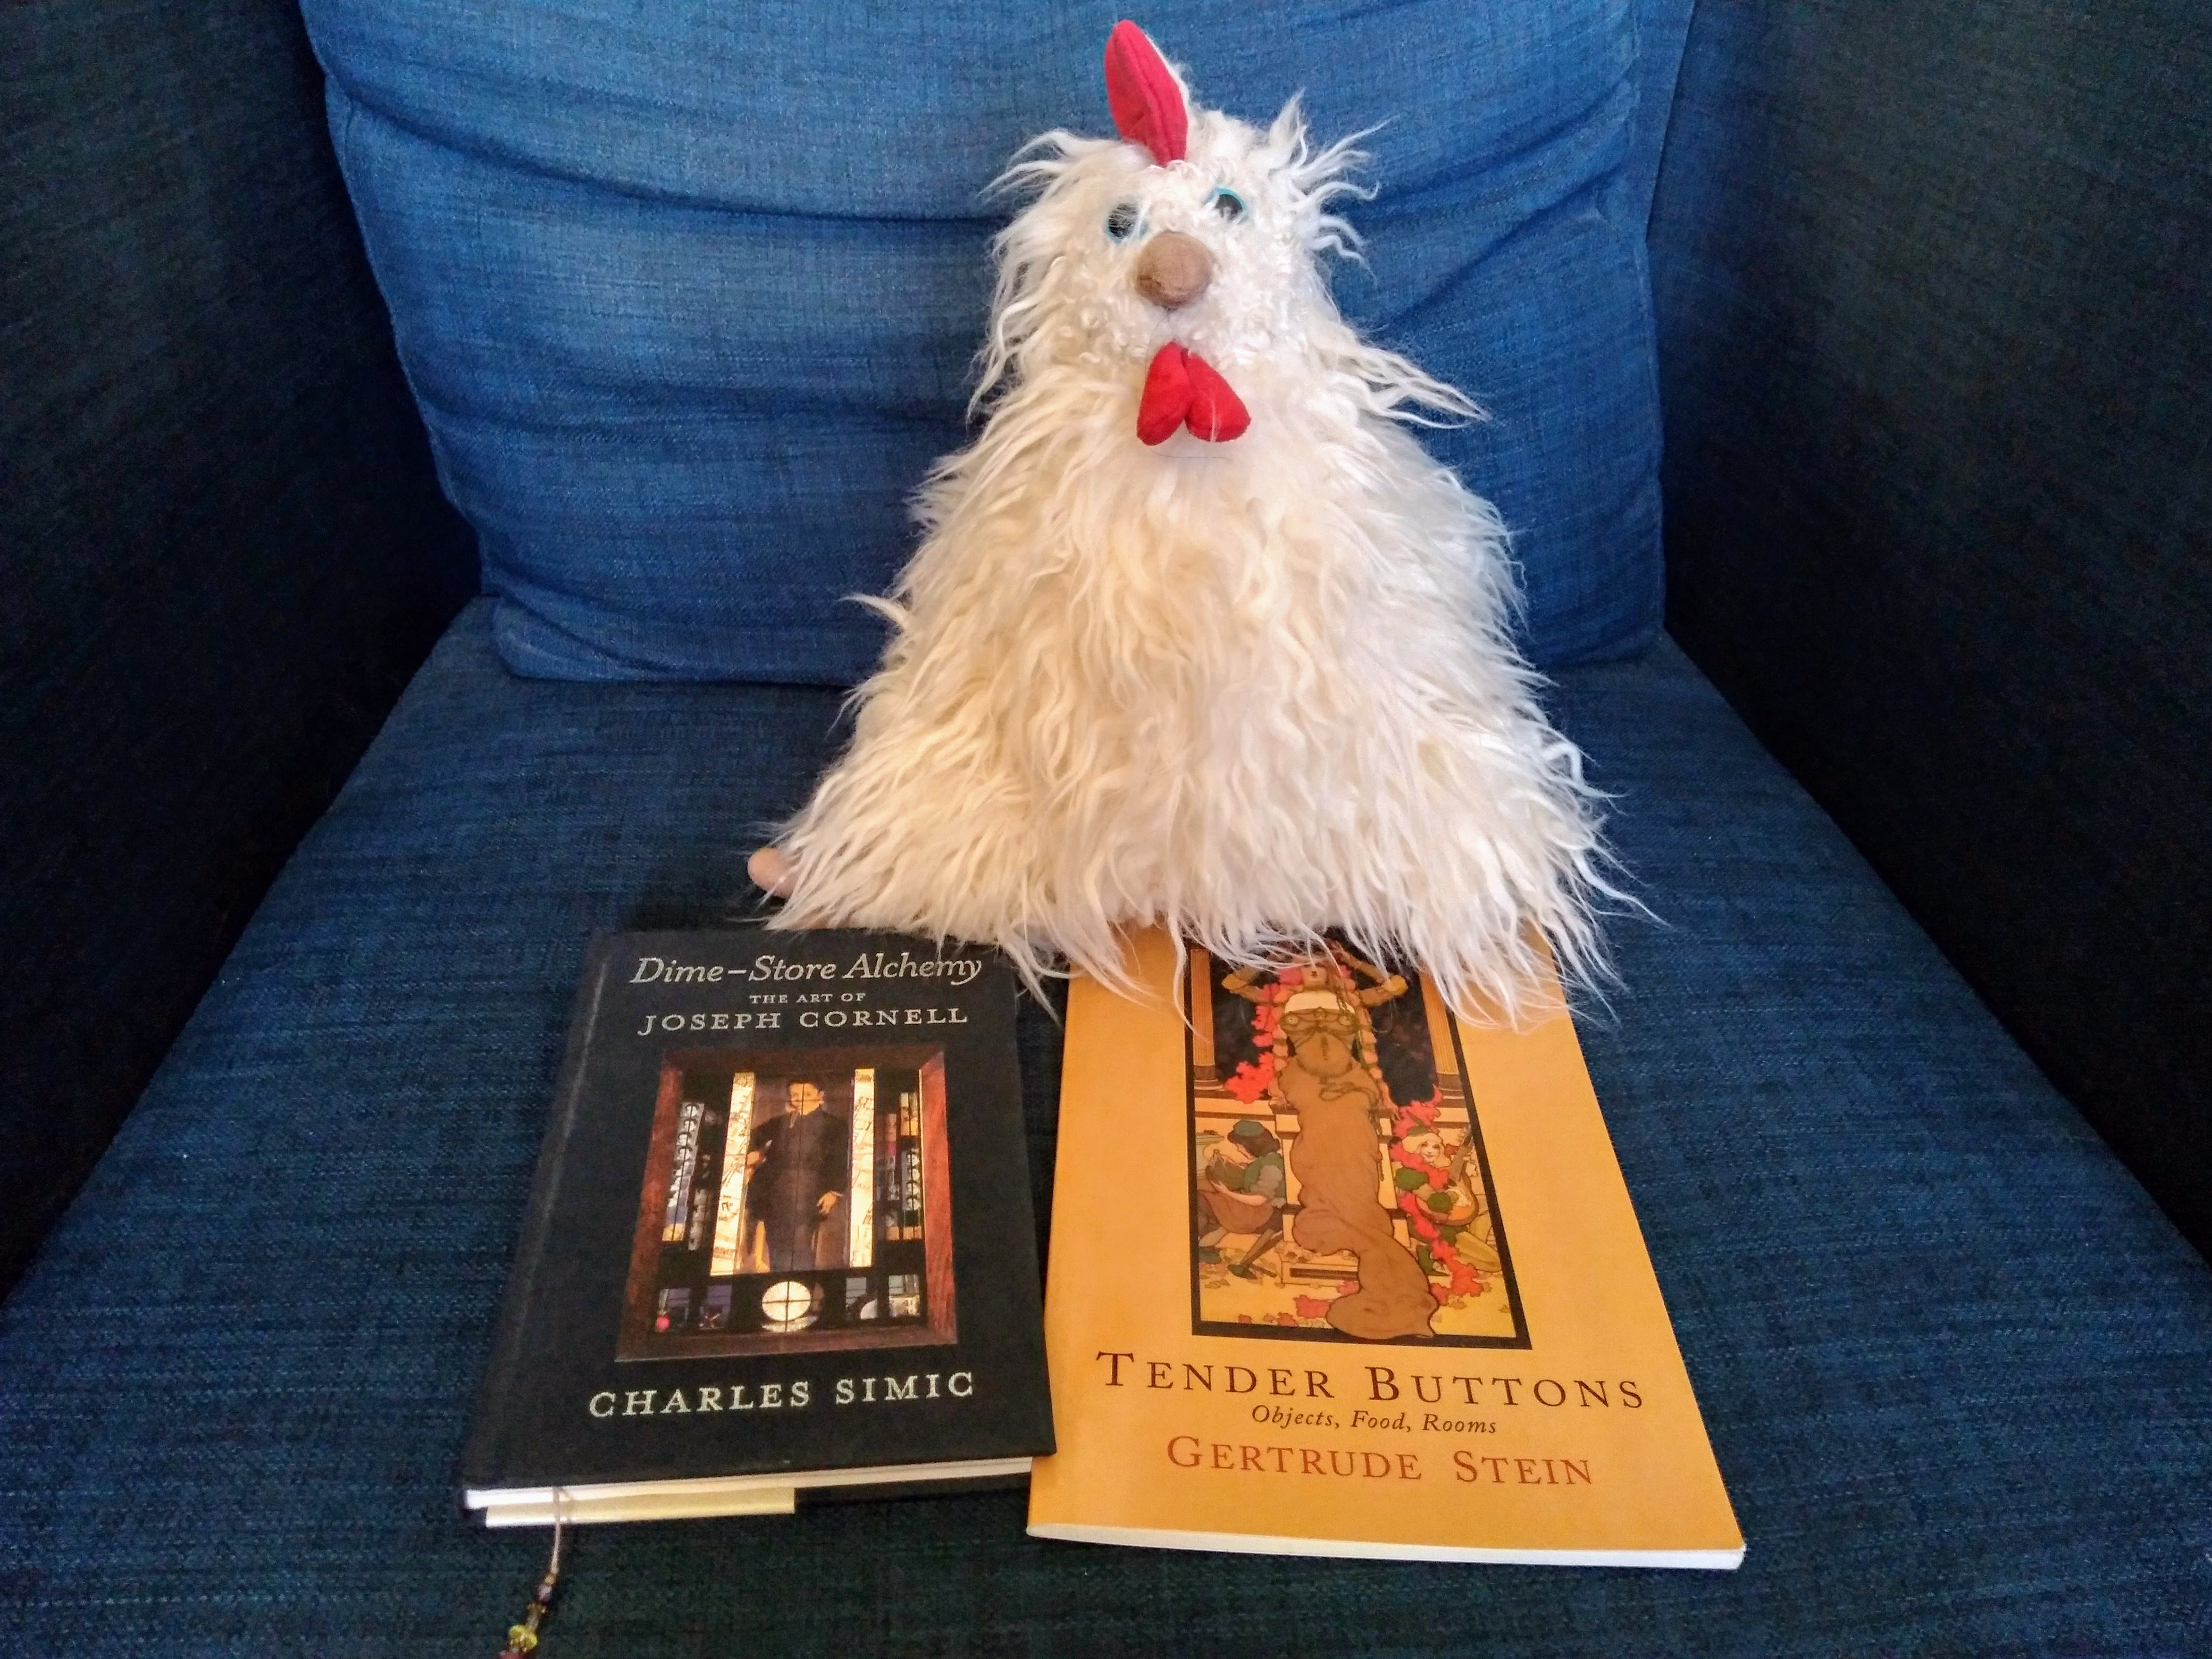 Prose poetry books and a chicken stuffed animal arranged on a couch